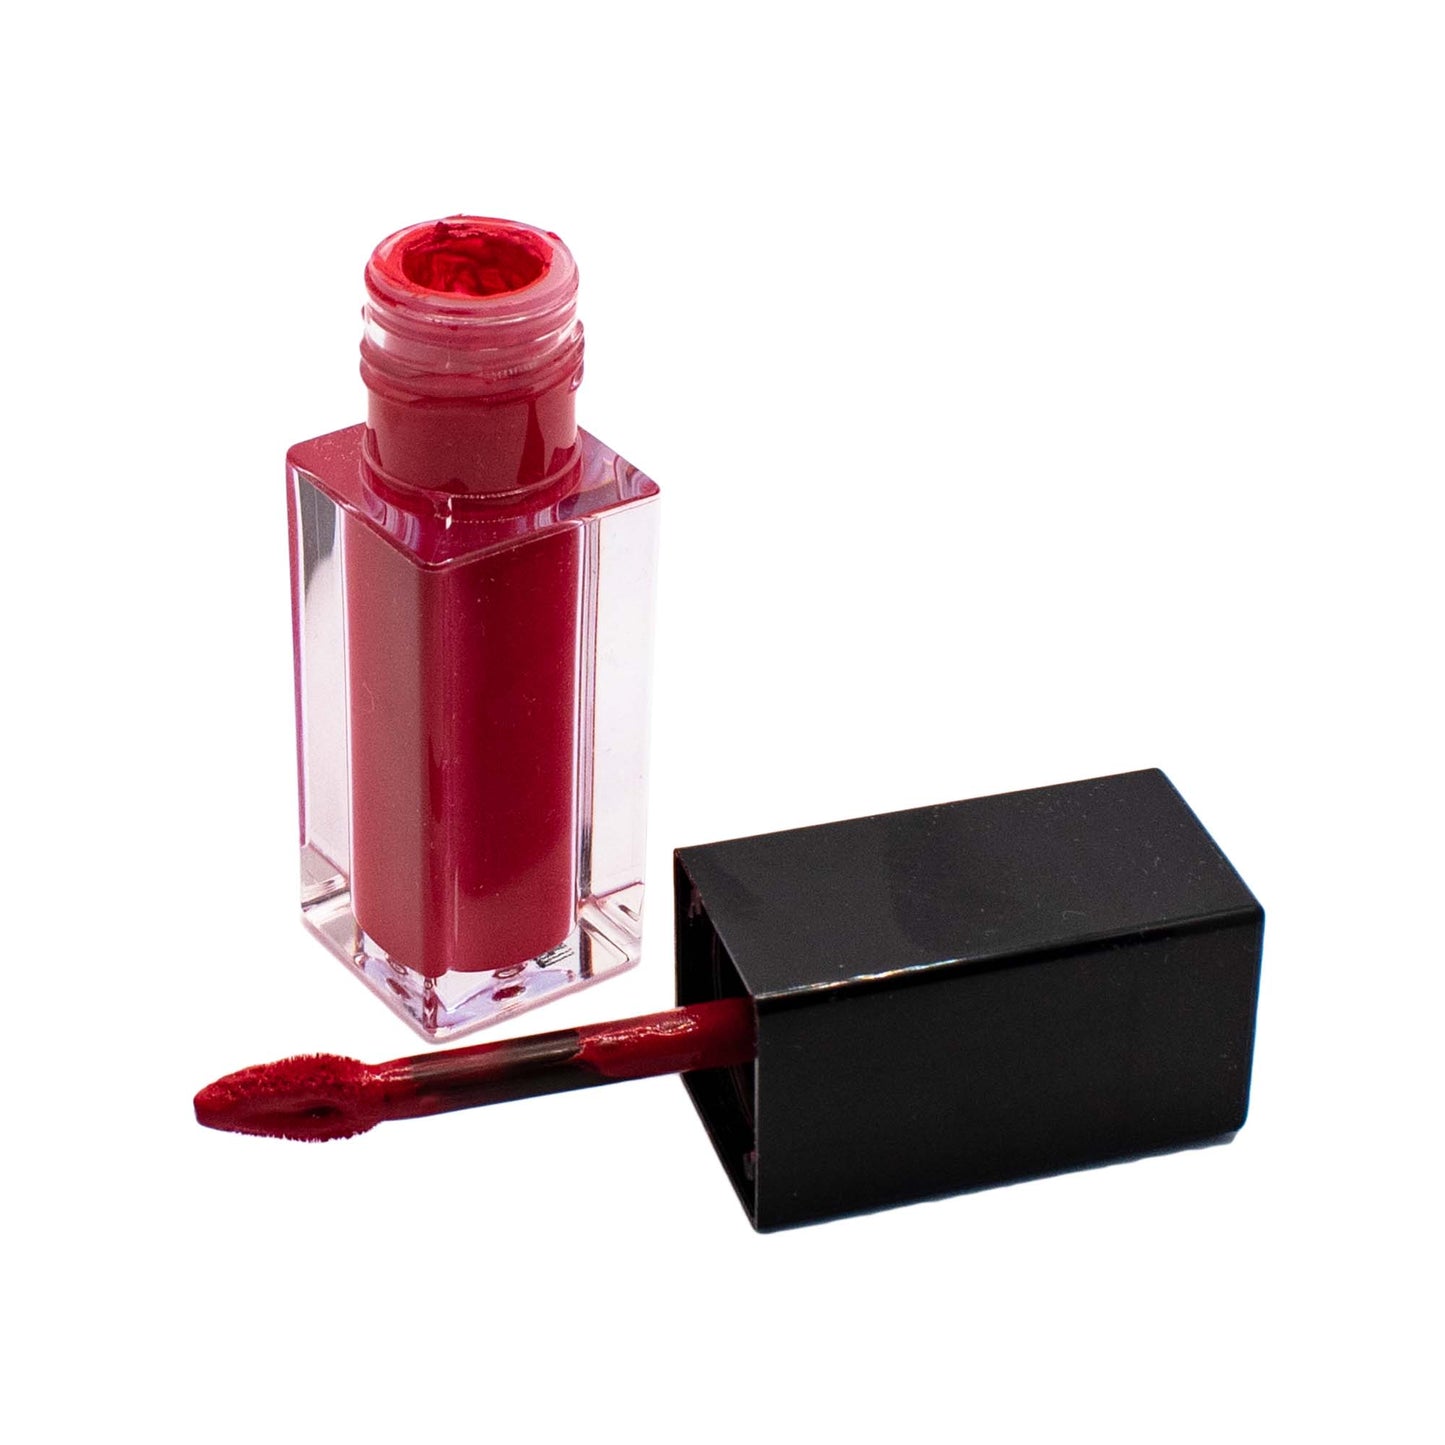 Cruisin Organics Blackberry Wine Matte Lip Stain provides high-impact, high-density color with a velvety matte finish. Our precision application and vitamin E add a silky, refined touch.